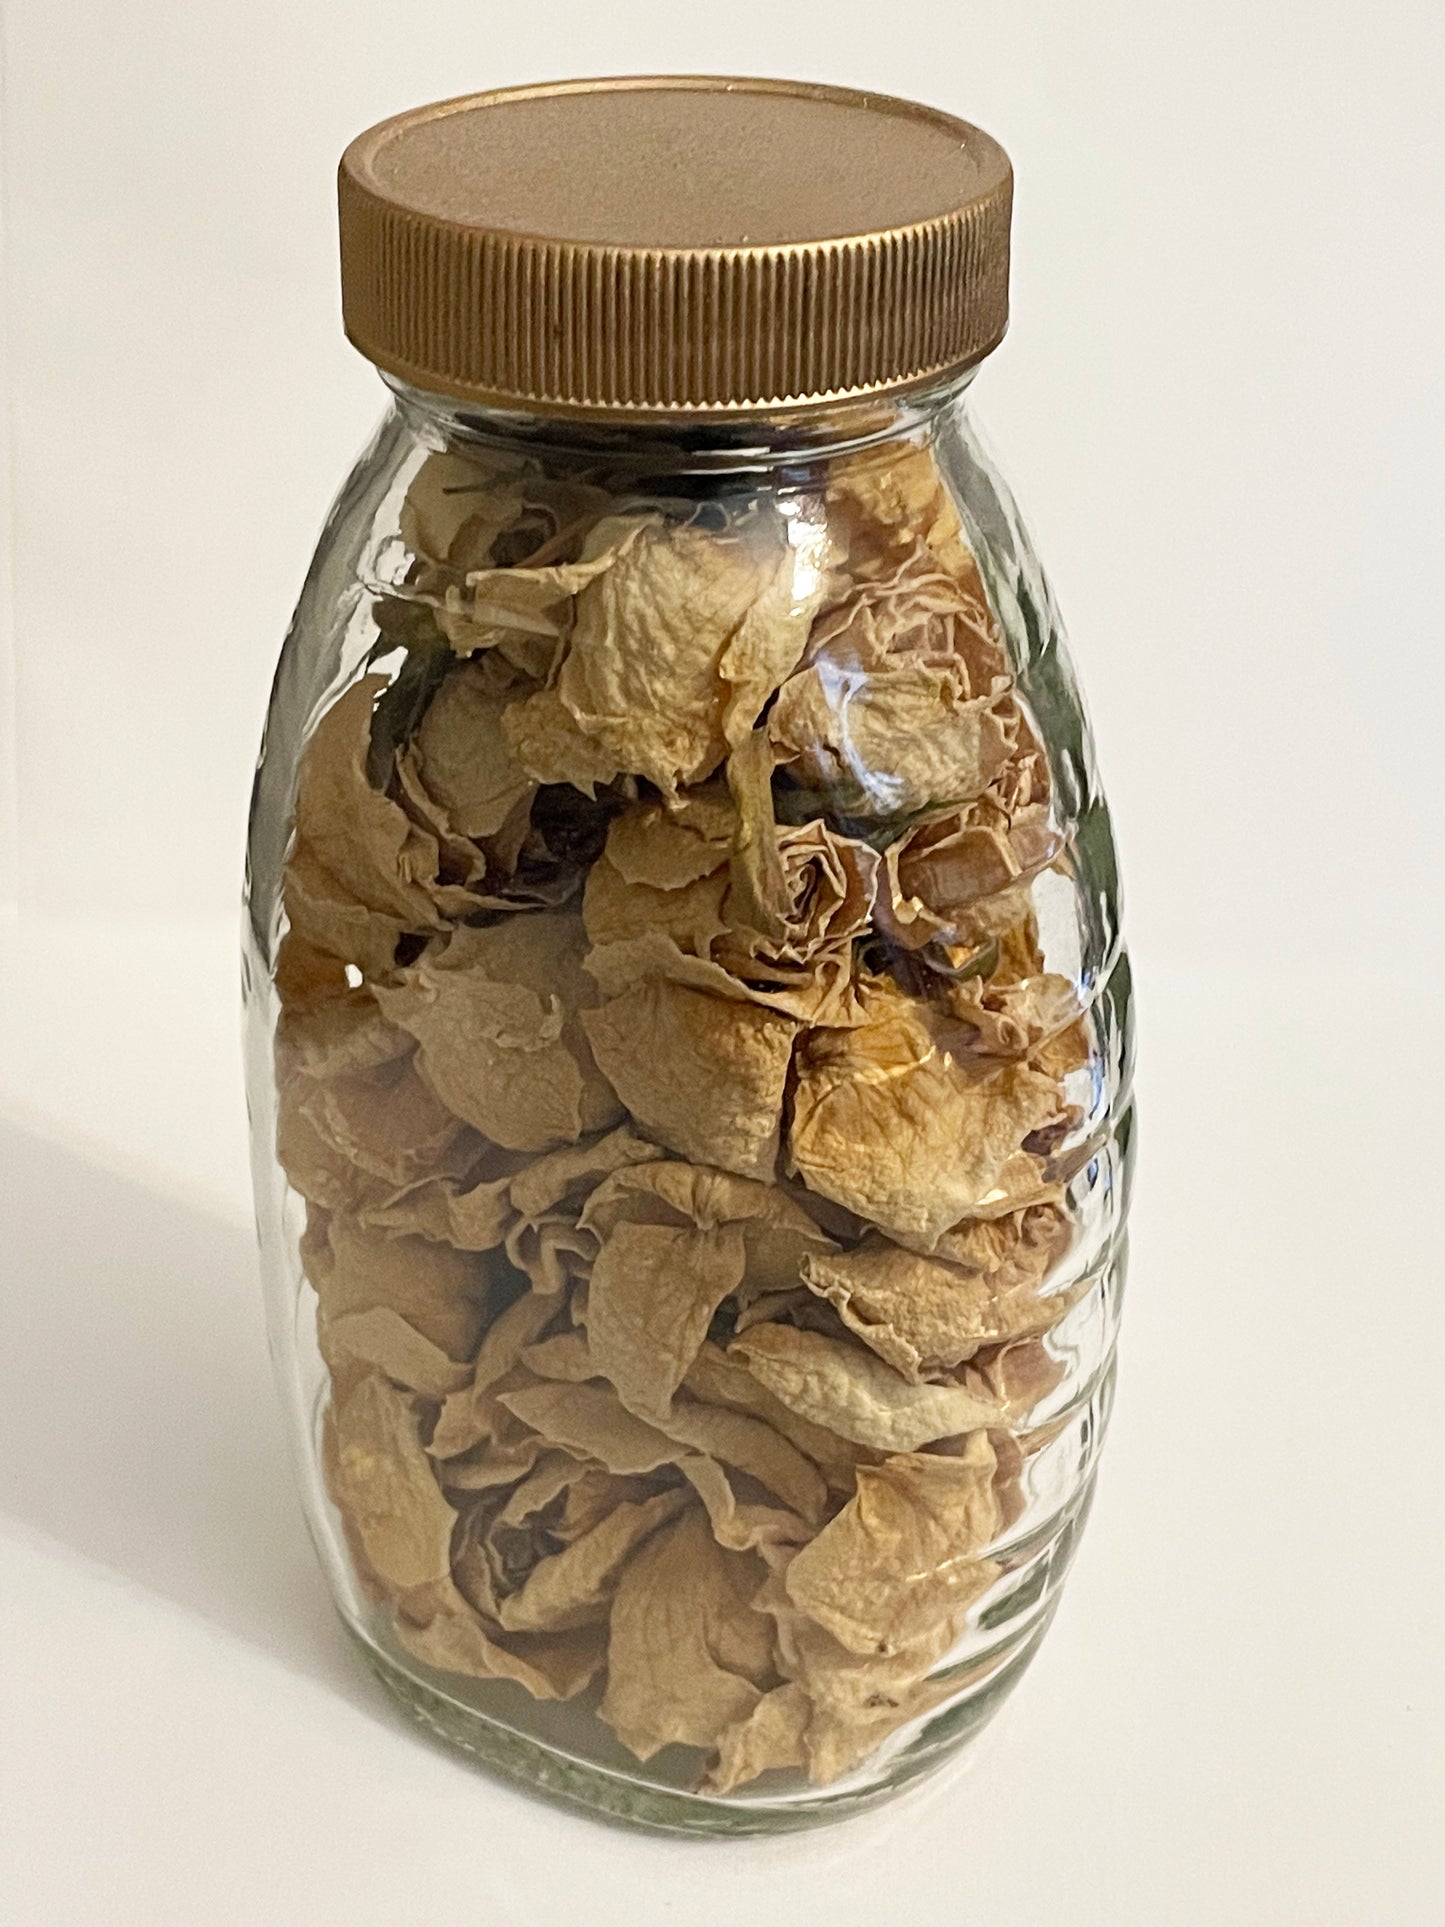 Boho Style Dried Golden Blush Rosebuds and Petals in Glass Honey Jar with Copper Gold Spray Painted Lid